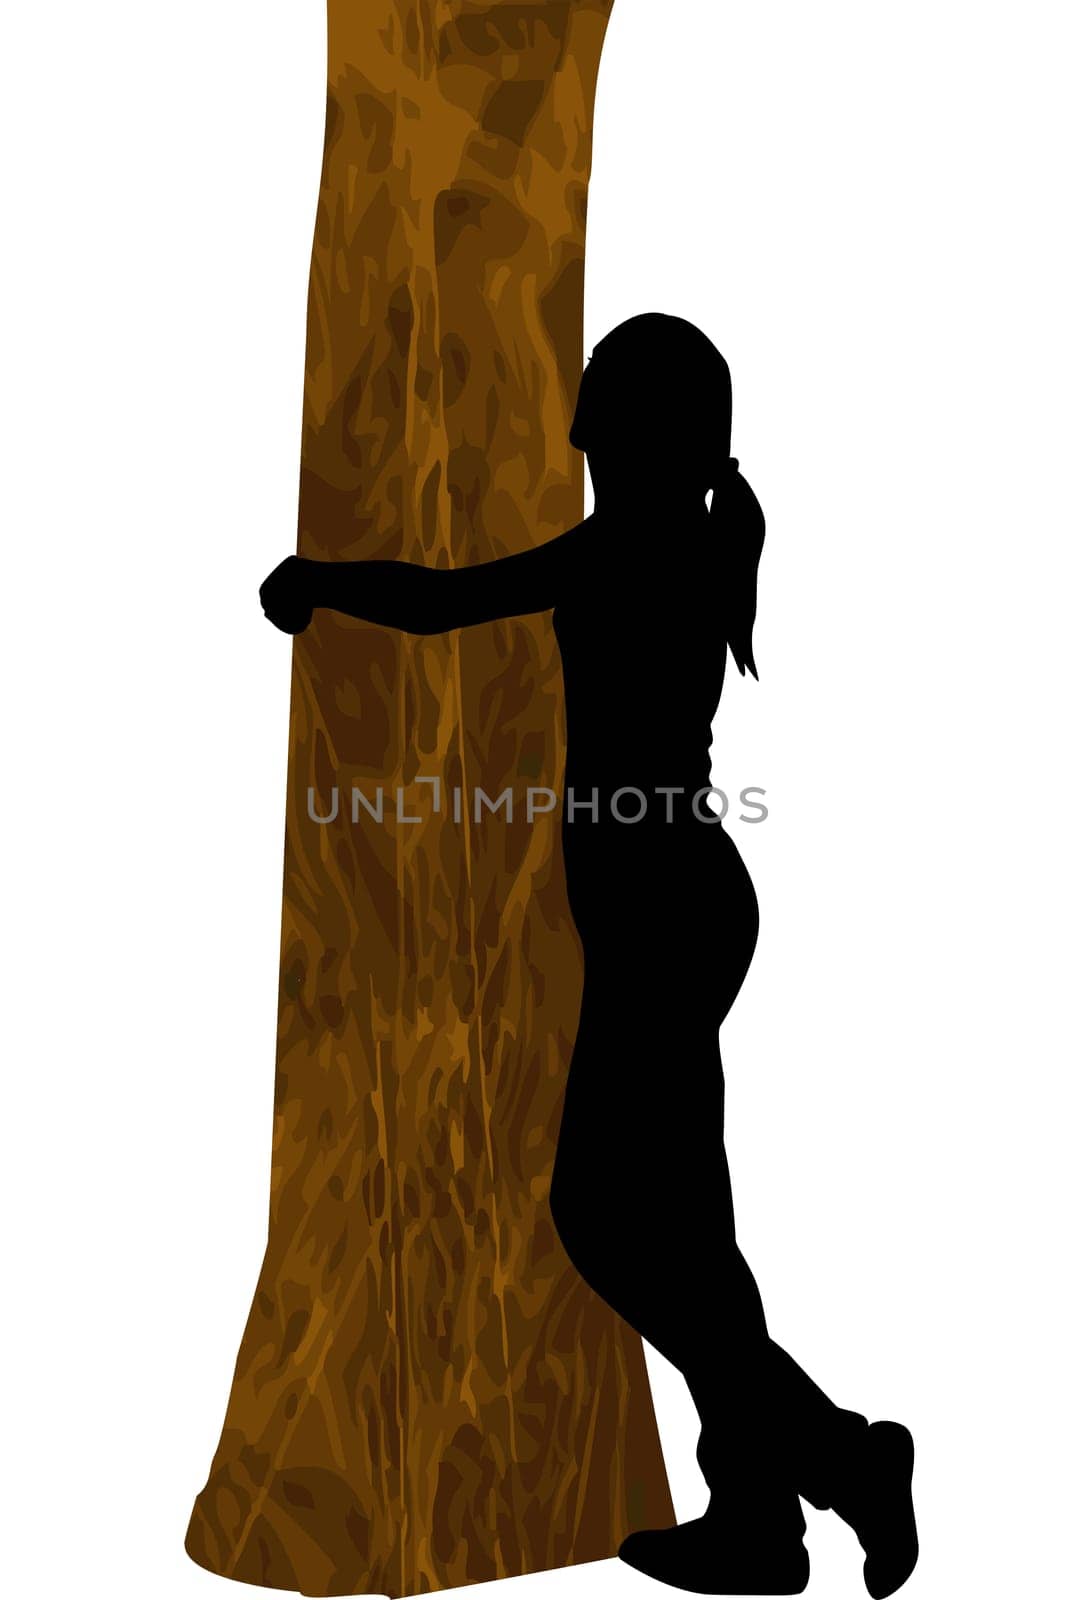 Silhouette of a young woman hugging a tree trunk